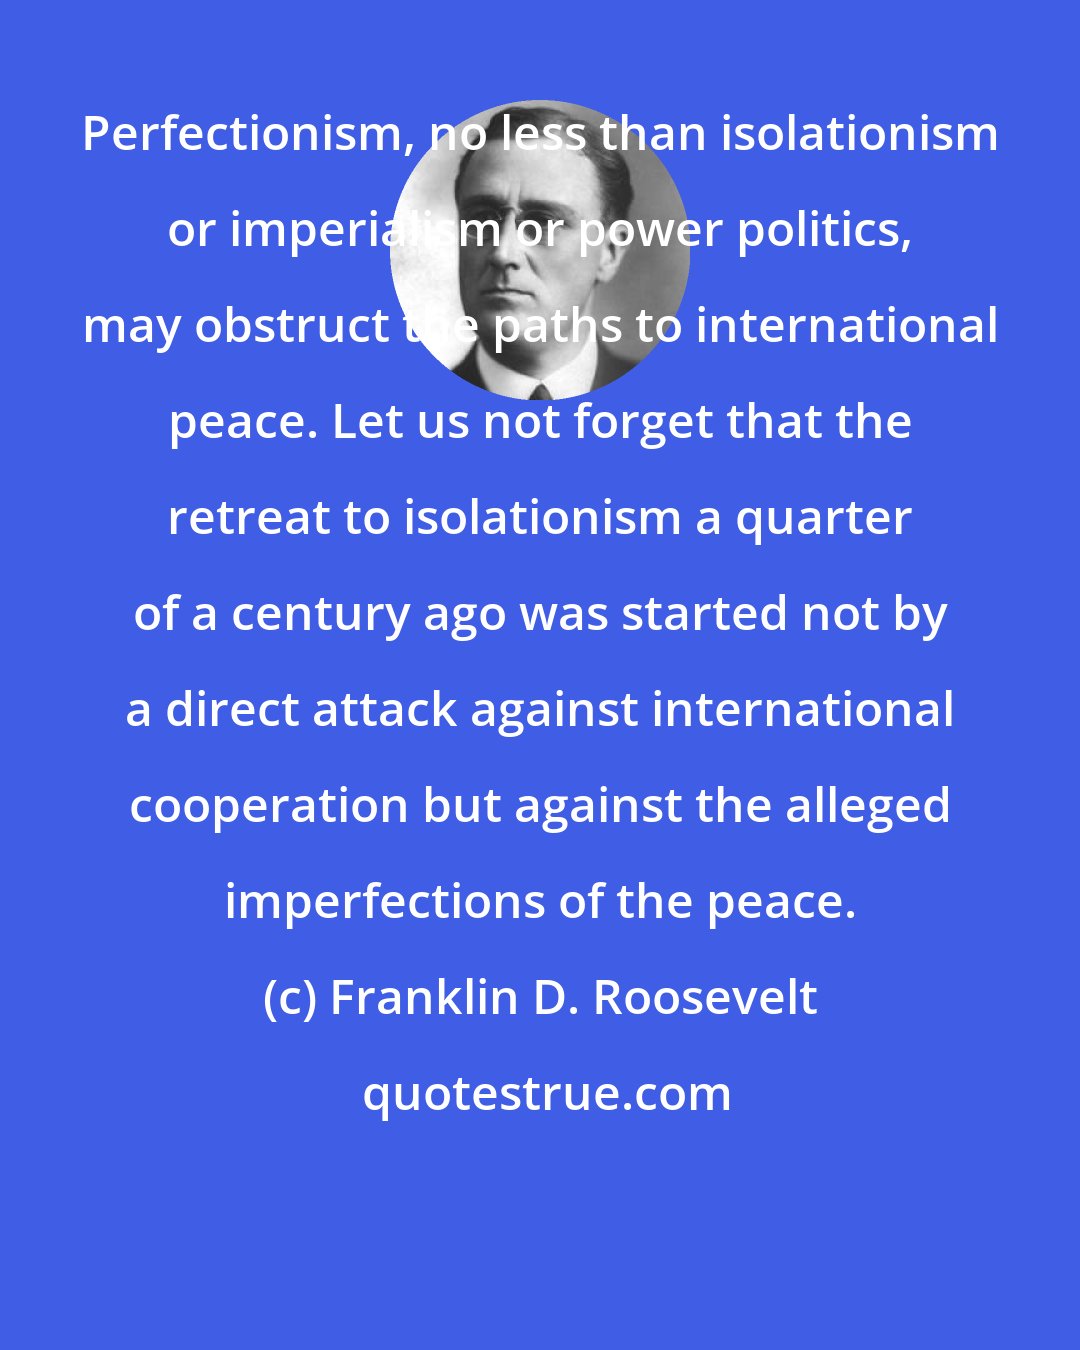 Franklin D. Roosevelt: Perfectionism, no less than isolationism or imperialism or power politics, may obstruct the paths to international peace. Let us not forget that the retreat to isolationism a quarter of a century ago was started not by a direct attack against international cooperation but against the alleged imperfections of the peace.